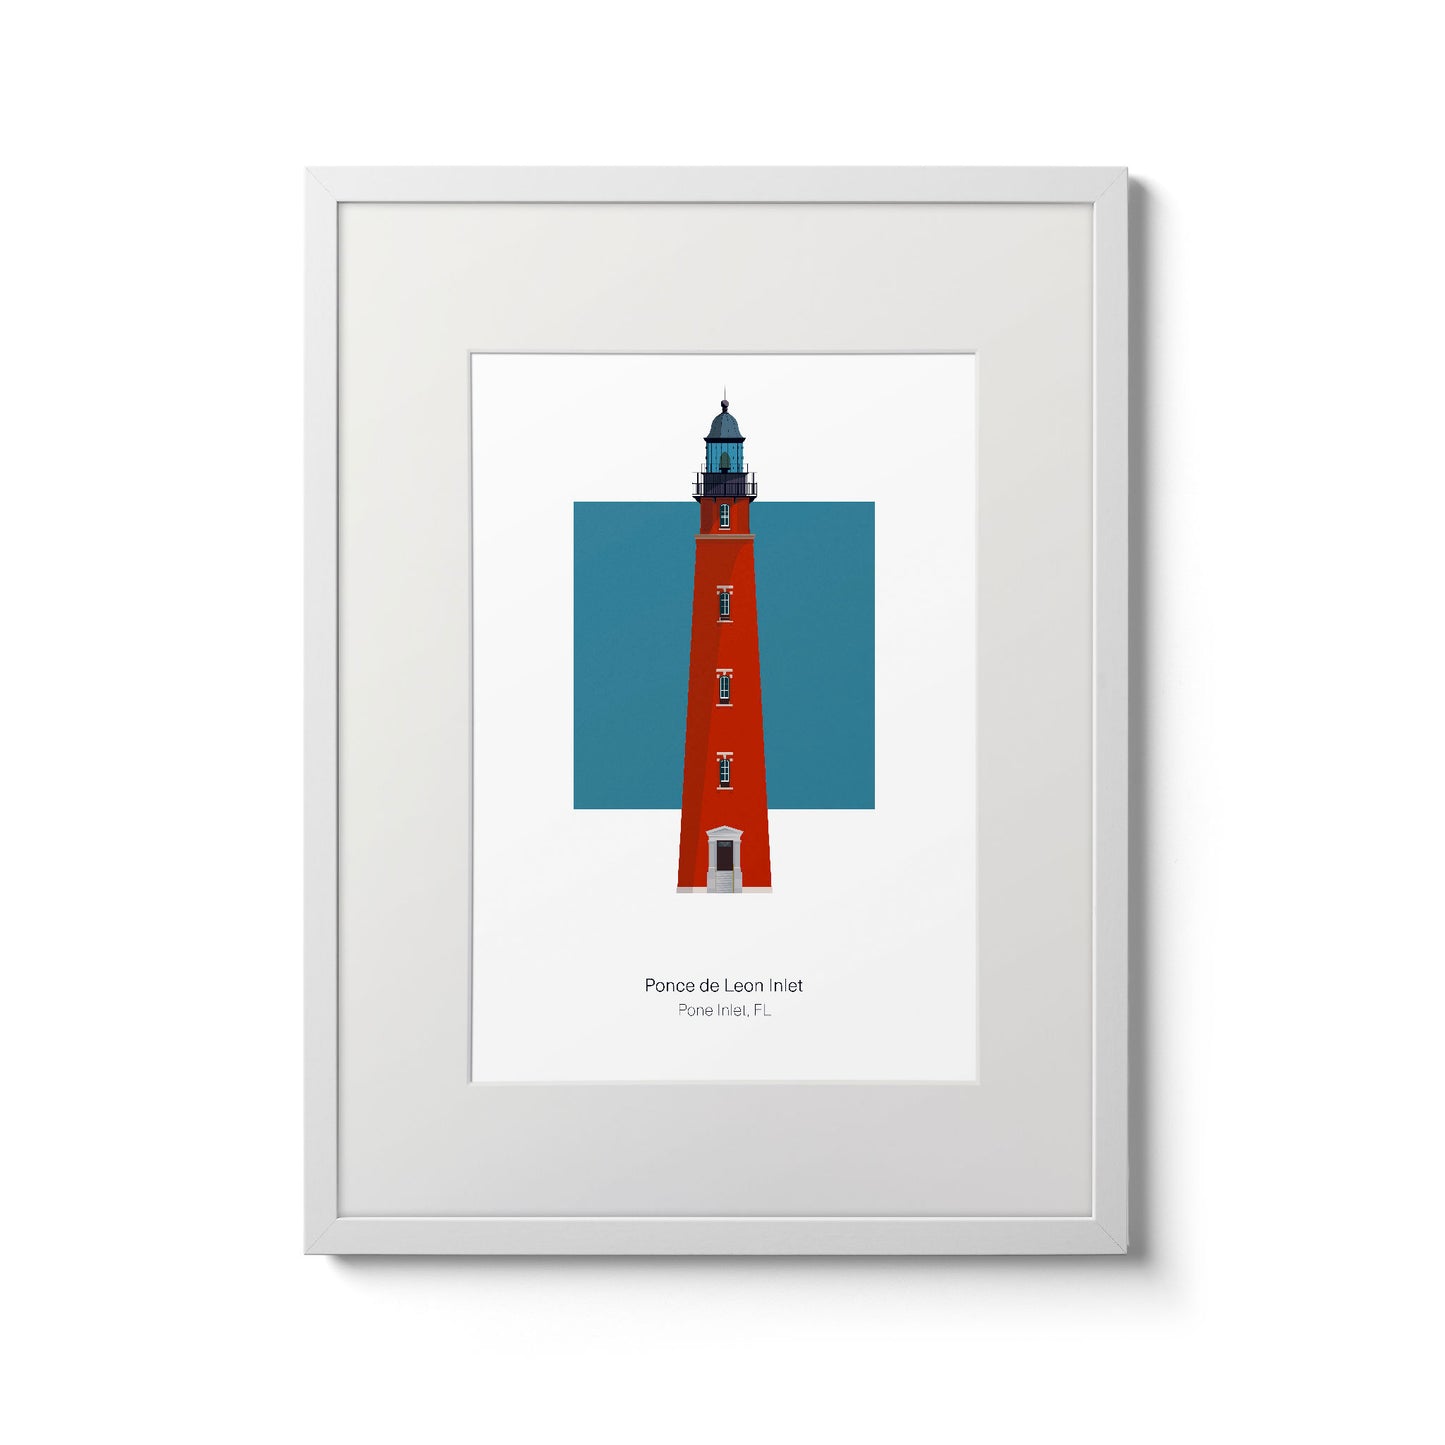 Illustration of the Ponce de Leon Inlet lighthouse, Florida, USA. On a white background with aqua blue square as a backdrop., in a white frame  and measuring 11"x14" (30x40cm).